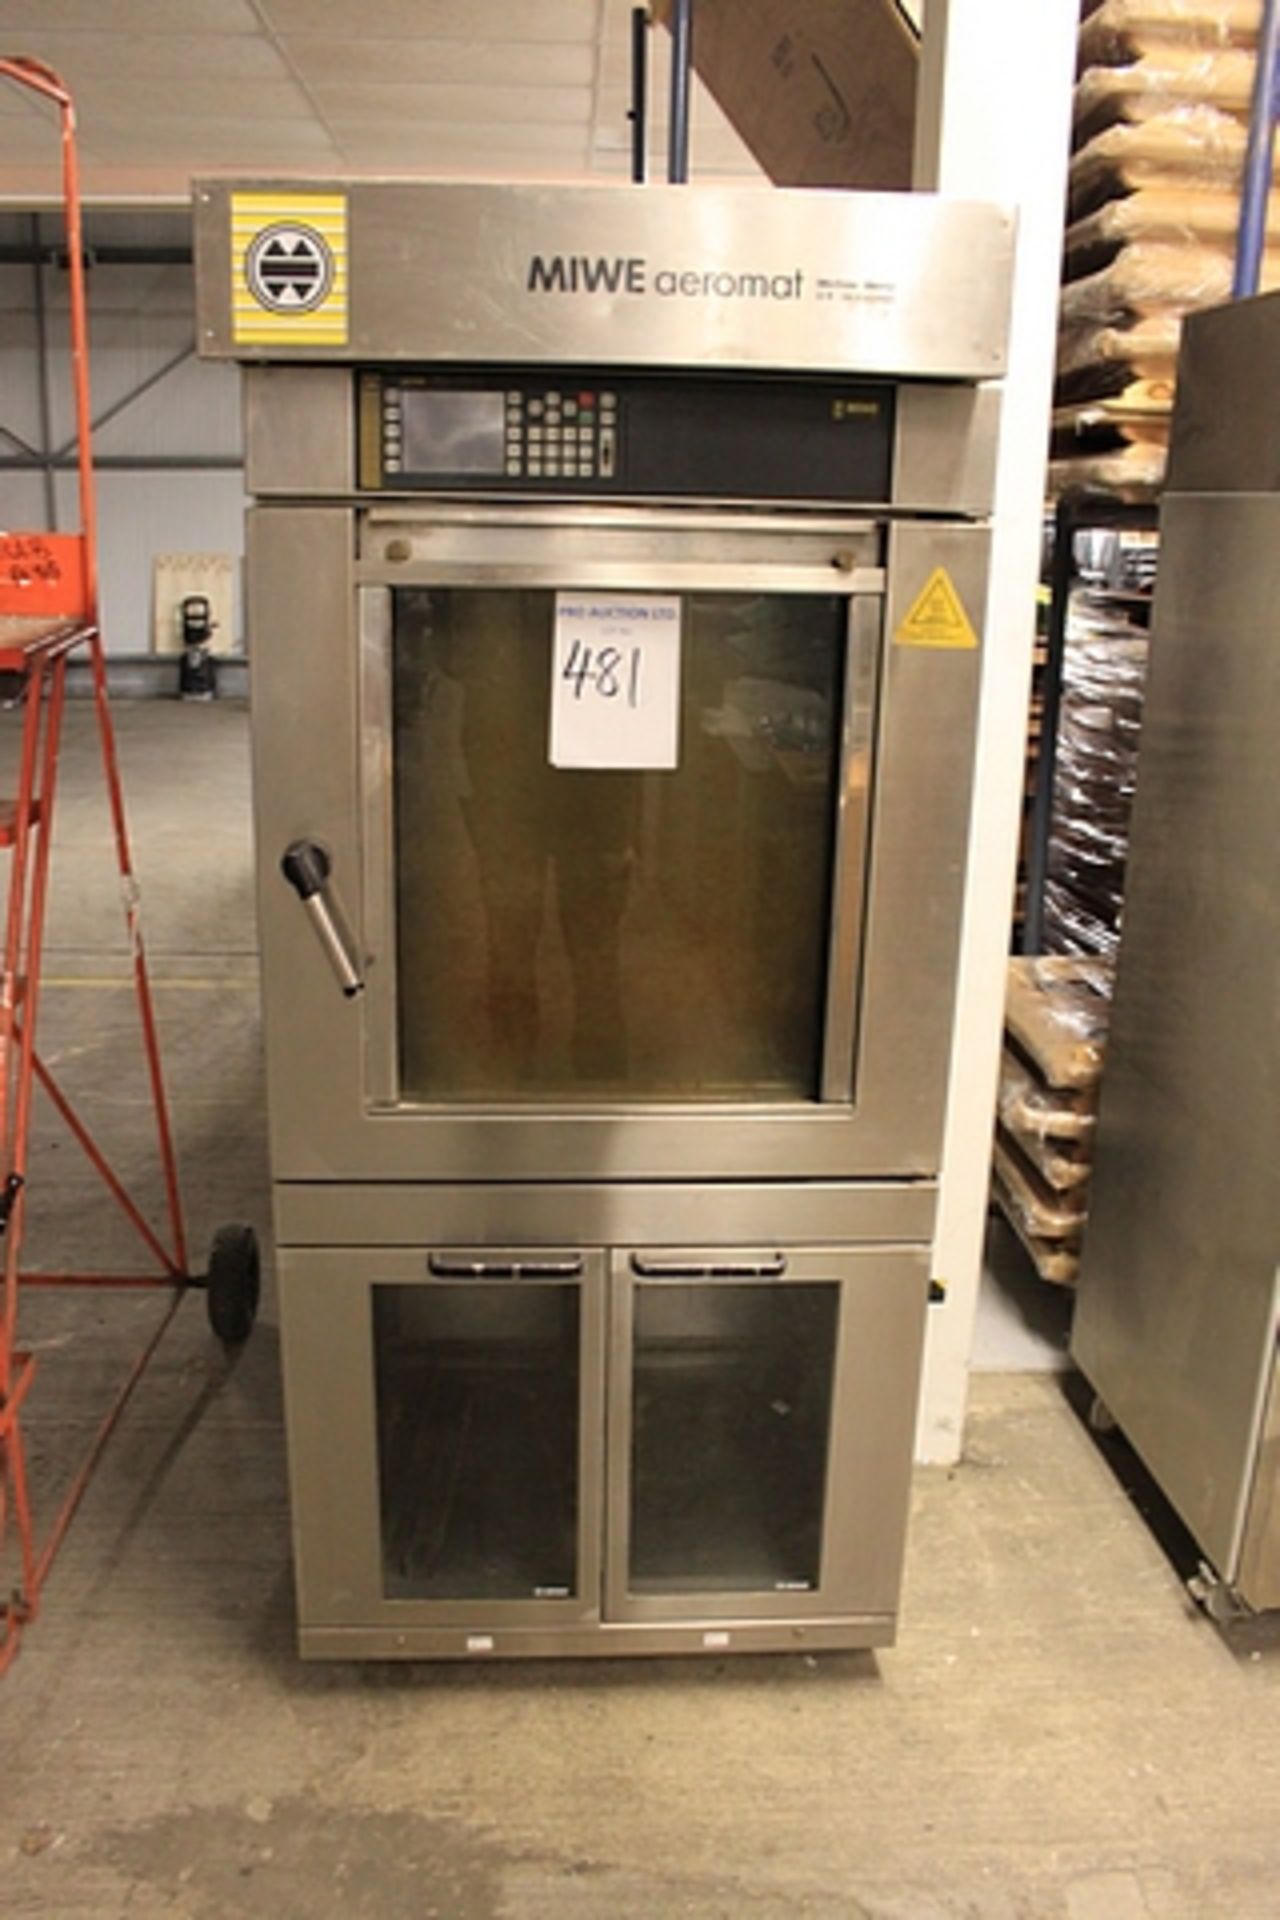 MIWE Aeromat CS convection oven & proofer 400v 23Kw 600mm x 400mm trays x 8 grid with proofing